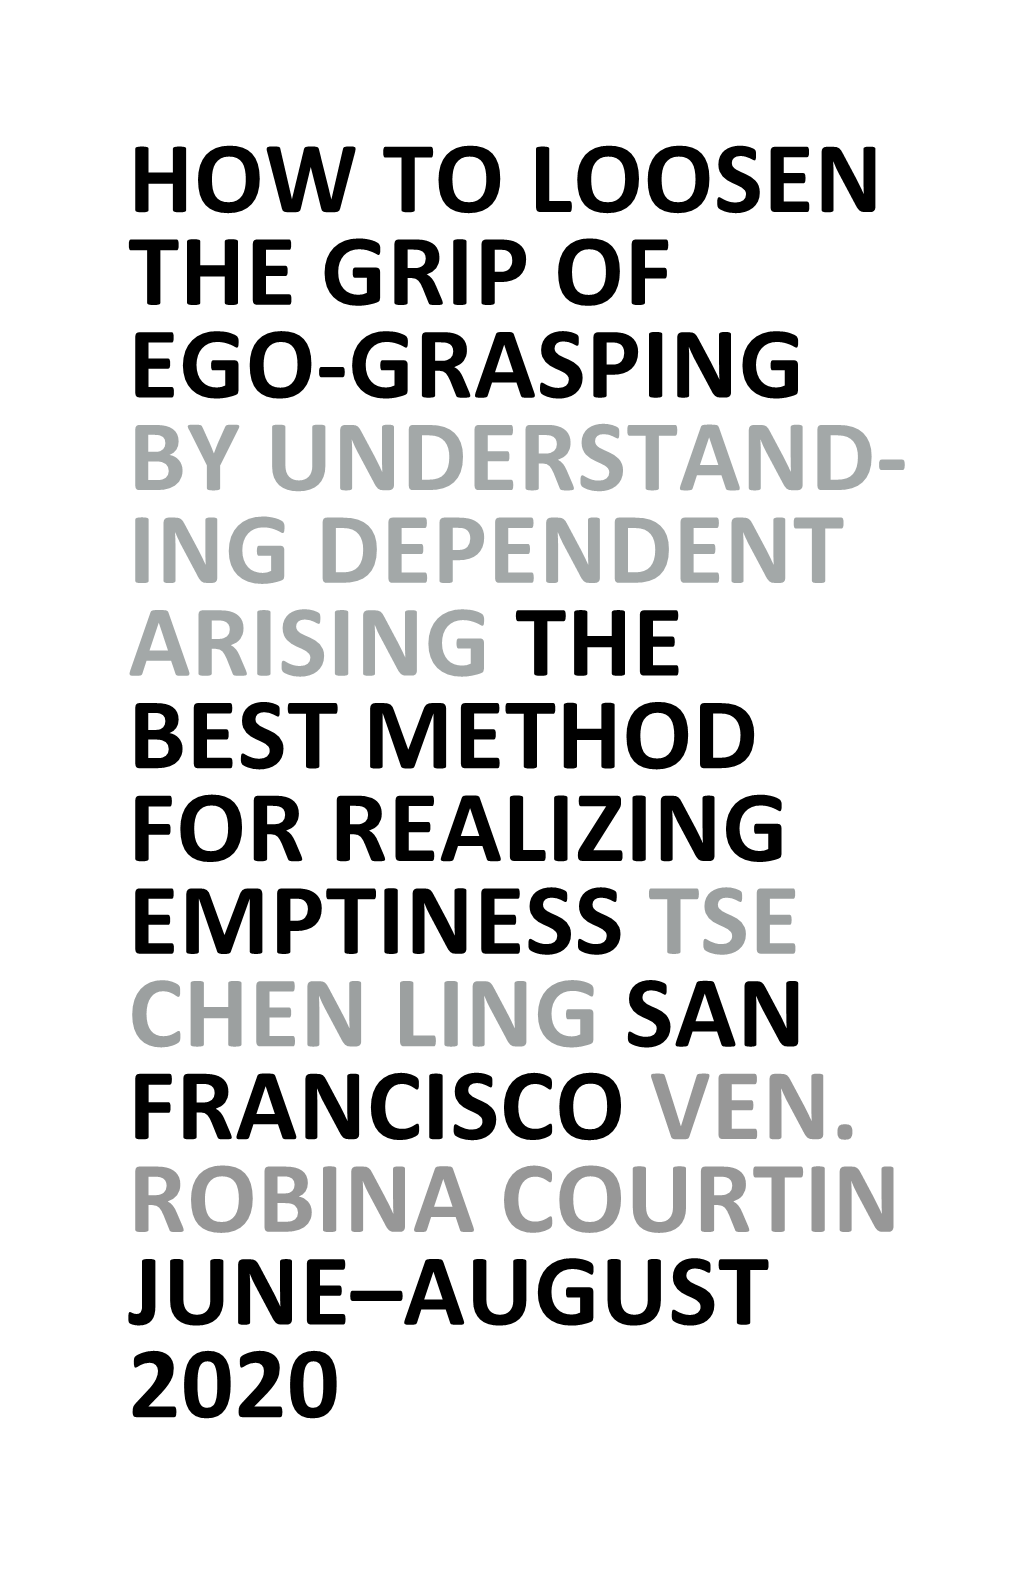 How to Loosen the Grip of Ego-Grasping by Understand- Ing Dependent Arising the Best Method for Realizing Emptiness Tse Chen Ling San Francisco Ven